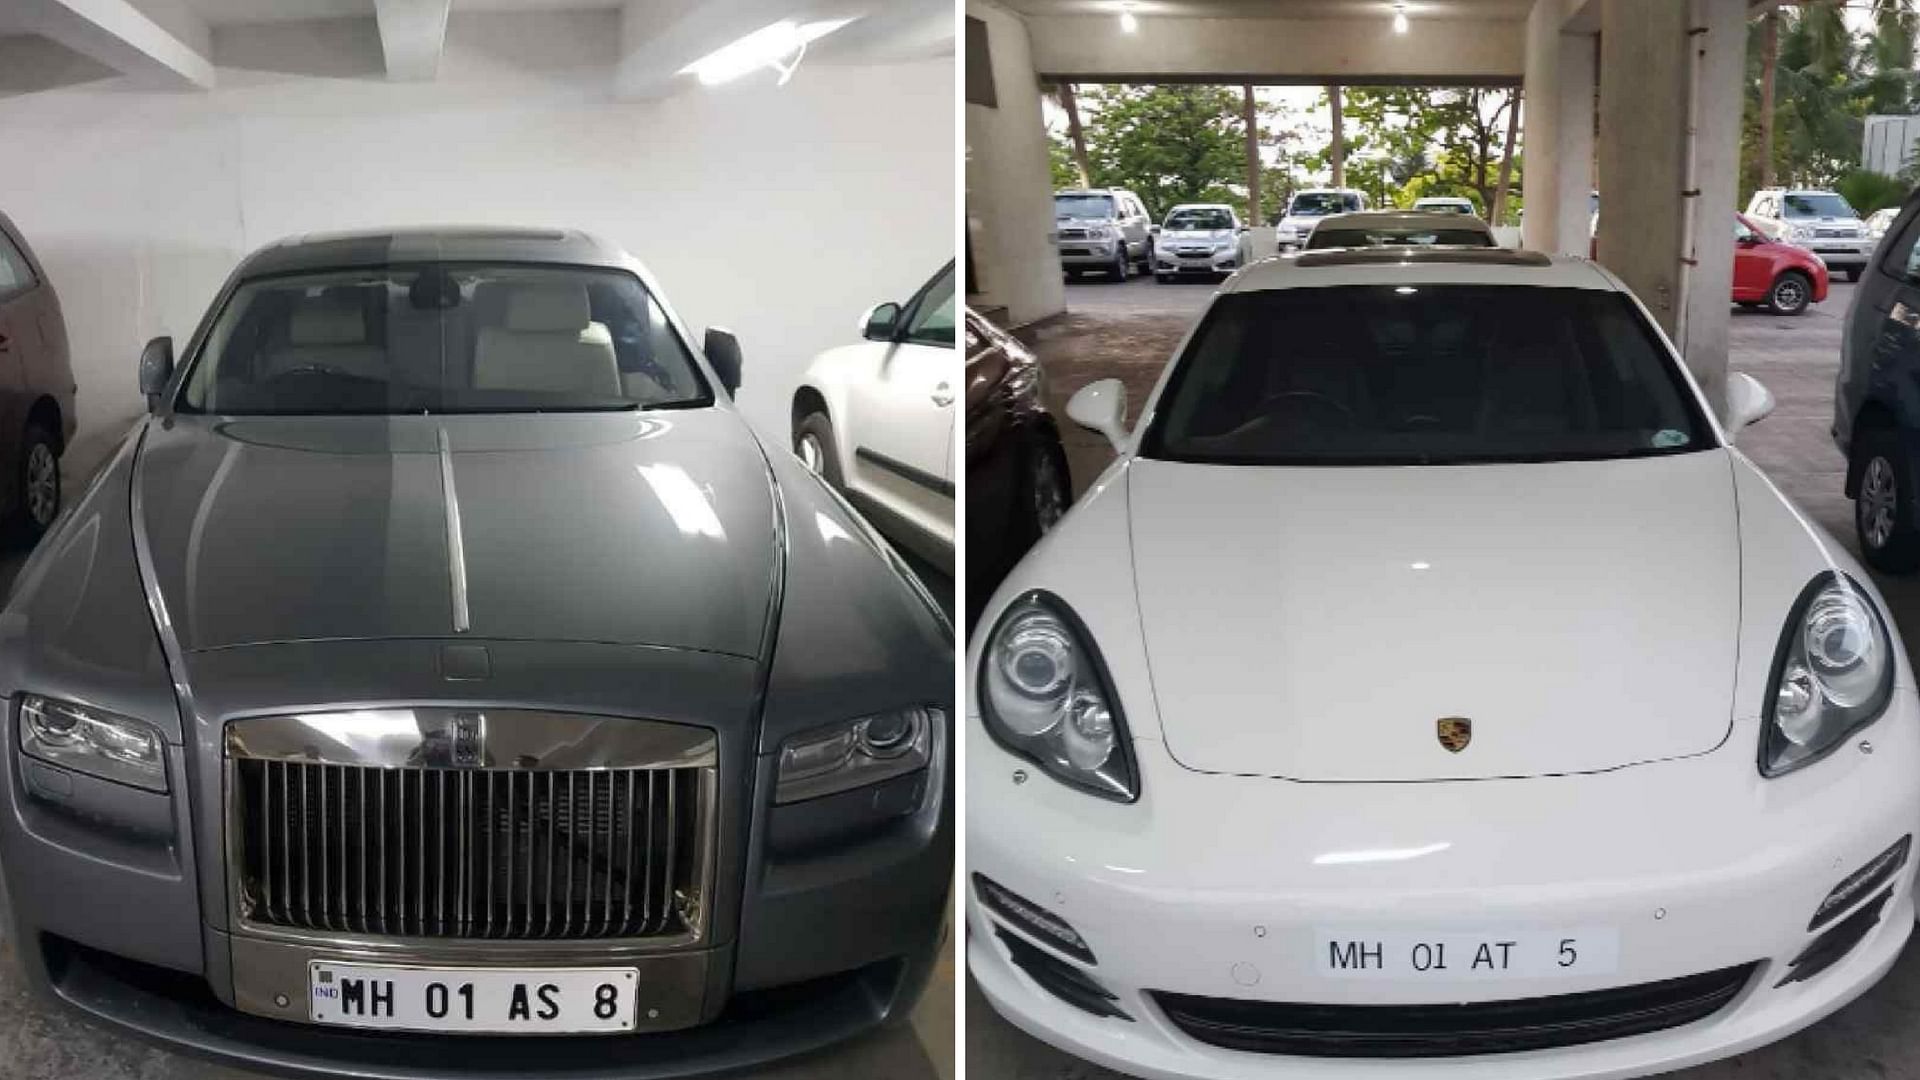 Cars seized by the Enforcement Directorate.